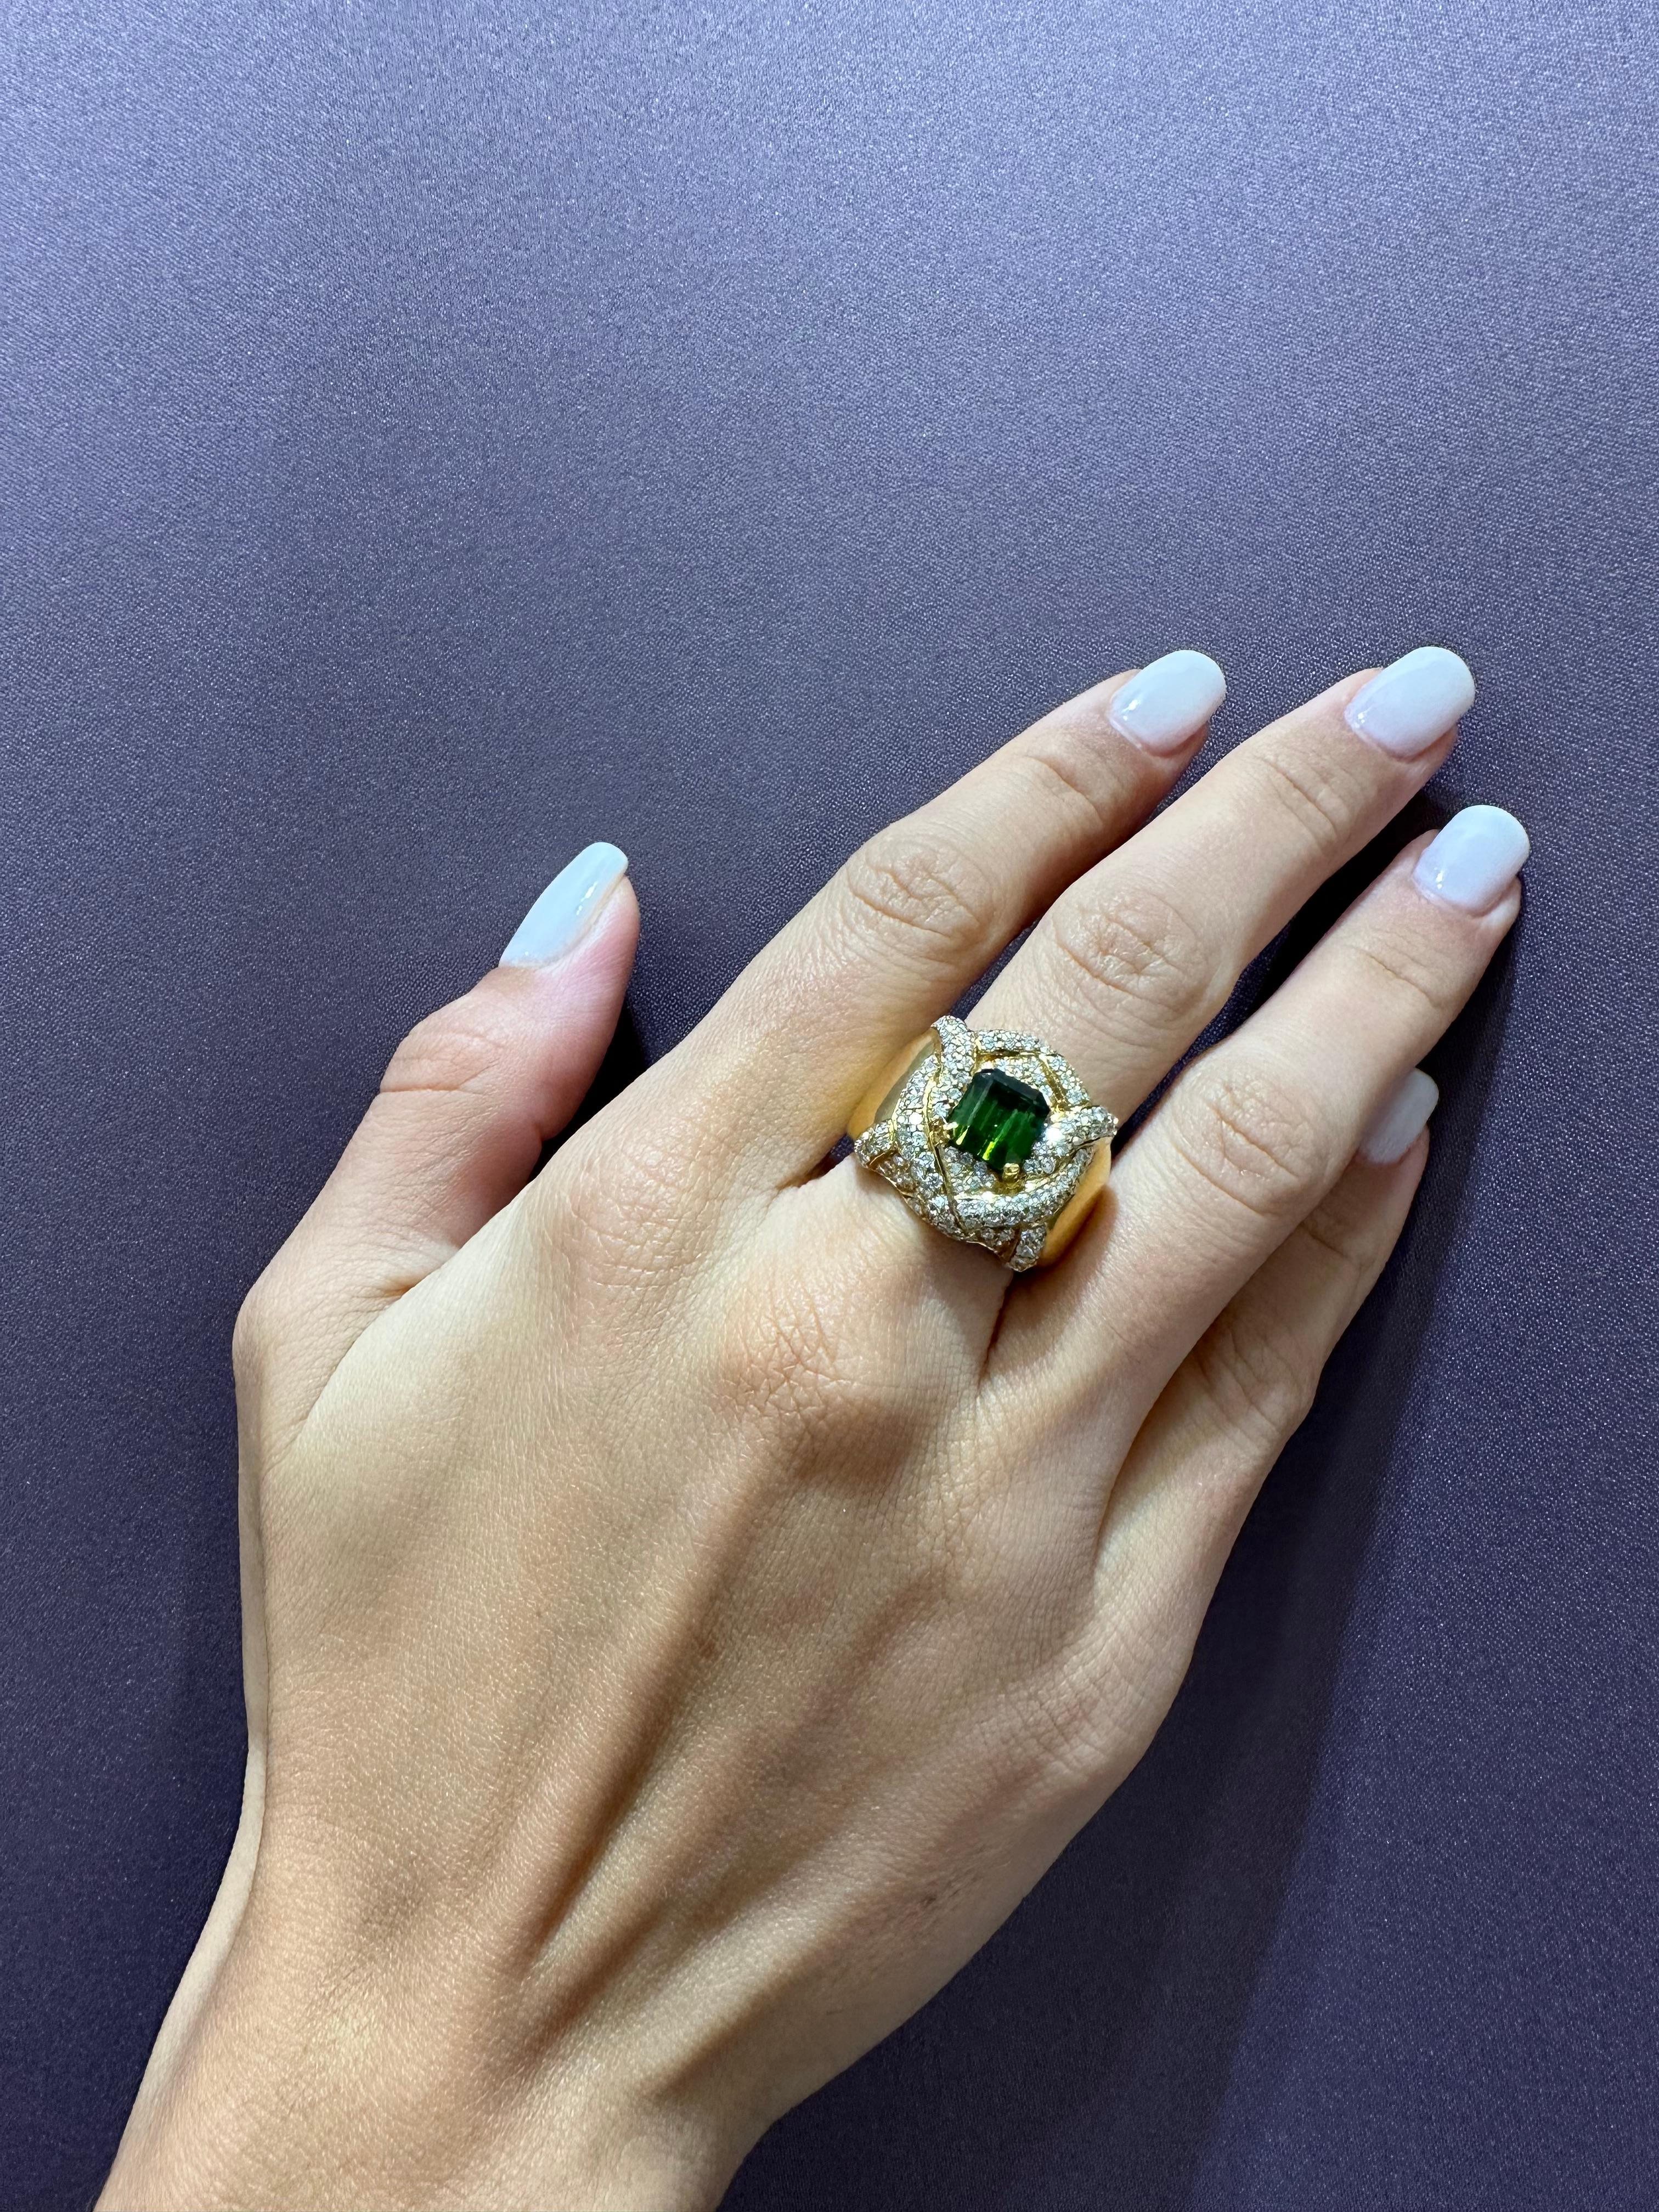 Rosior Cocktail Ring set in Yellow Gold with:
- 1 Green Tourmaline weighing 2,09 ct;
- 149 G-VVS Natural Diamonds weighing 1,39 ct.
Weight in 19.2K Gold: 19.9 g.
Handmade in Portugal.
Stamped by the portuguese assay office as 19.2K Gold.
Stamped